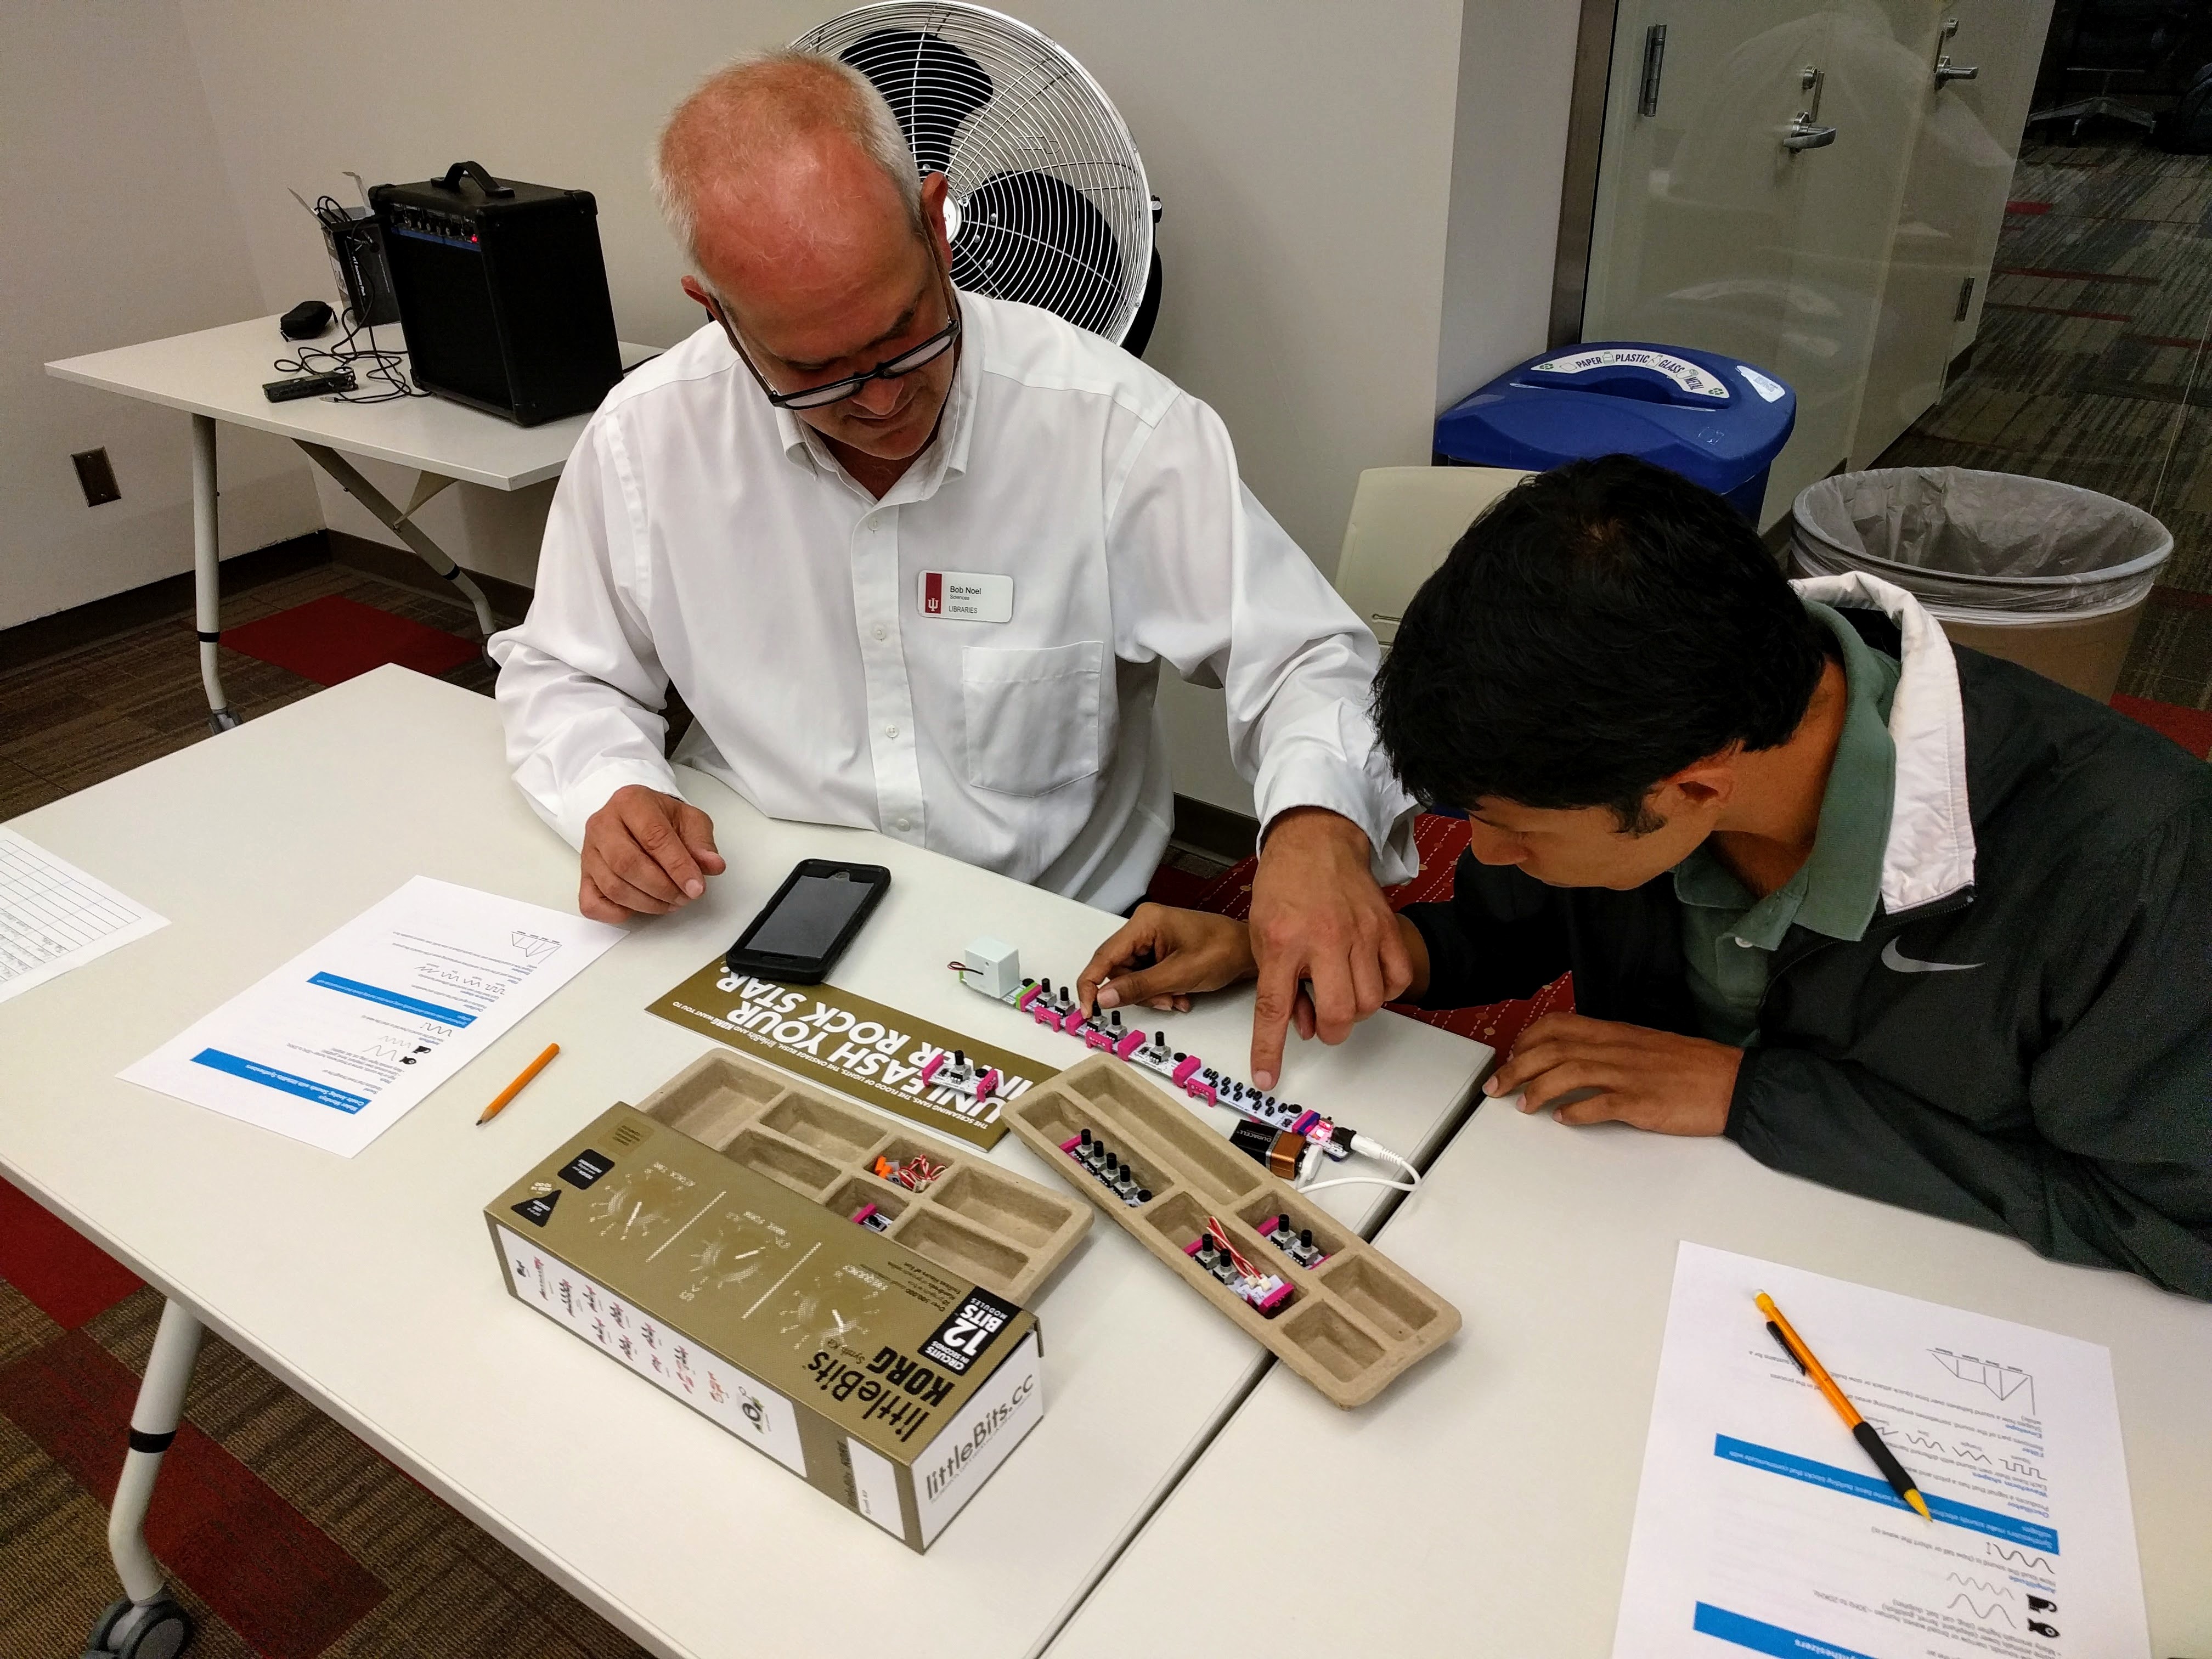 A student and librarian play with littleBits synthesizer kits.